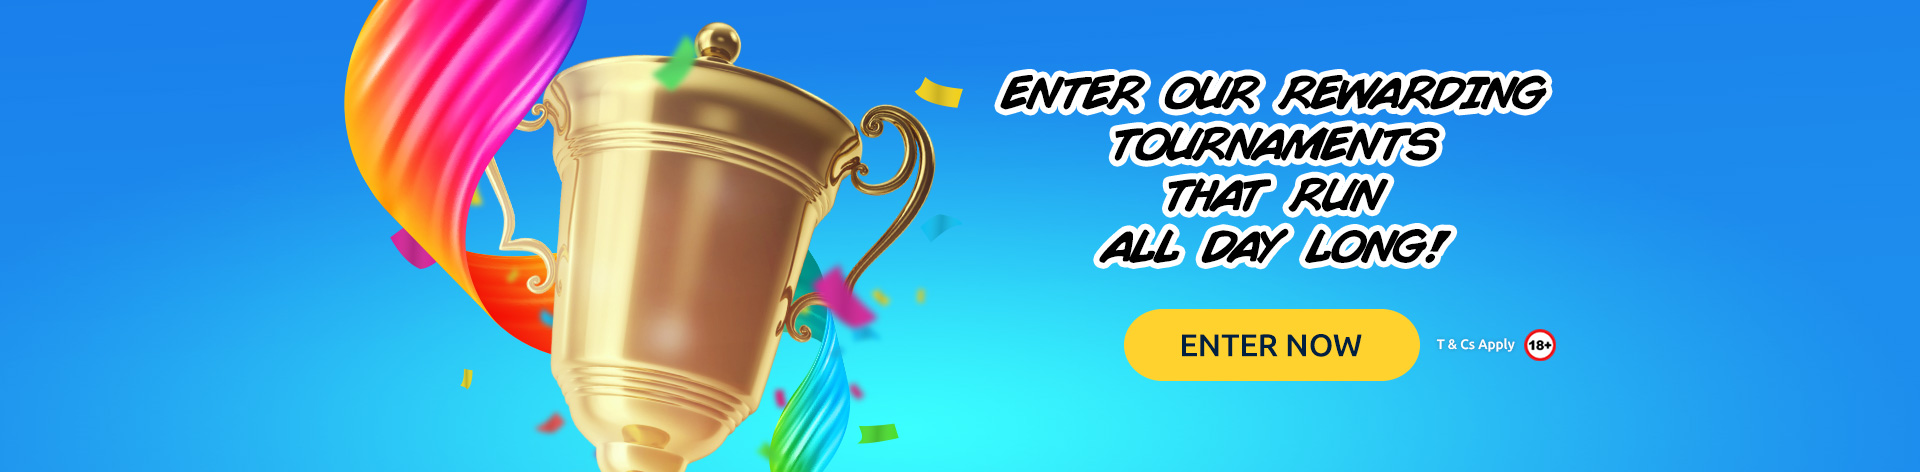 Enter our rewarding Tournaments that run all day long! (Terms & Conditions apply.)